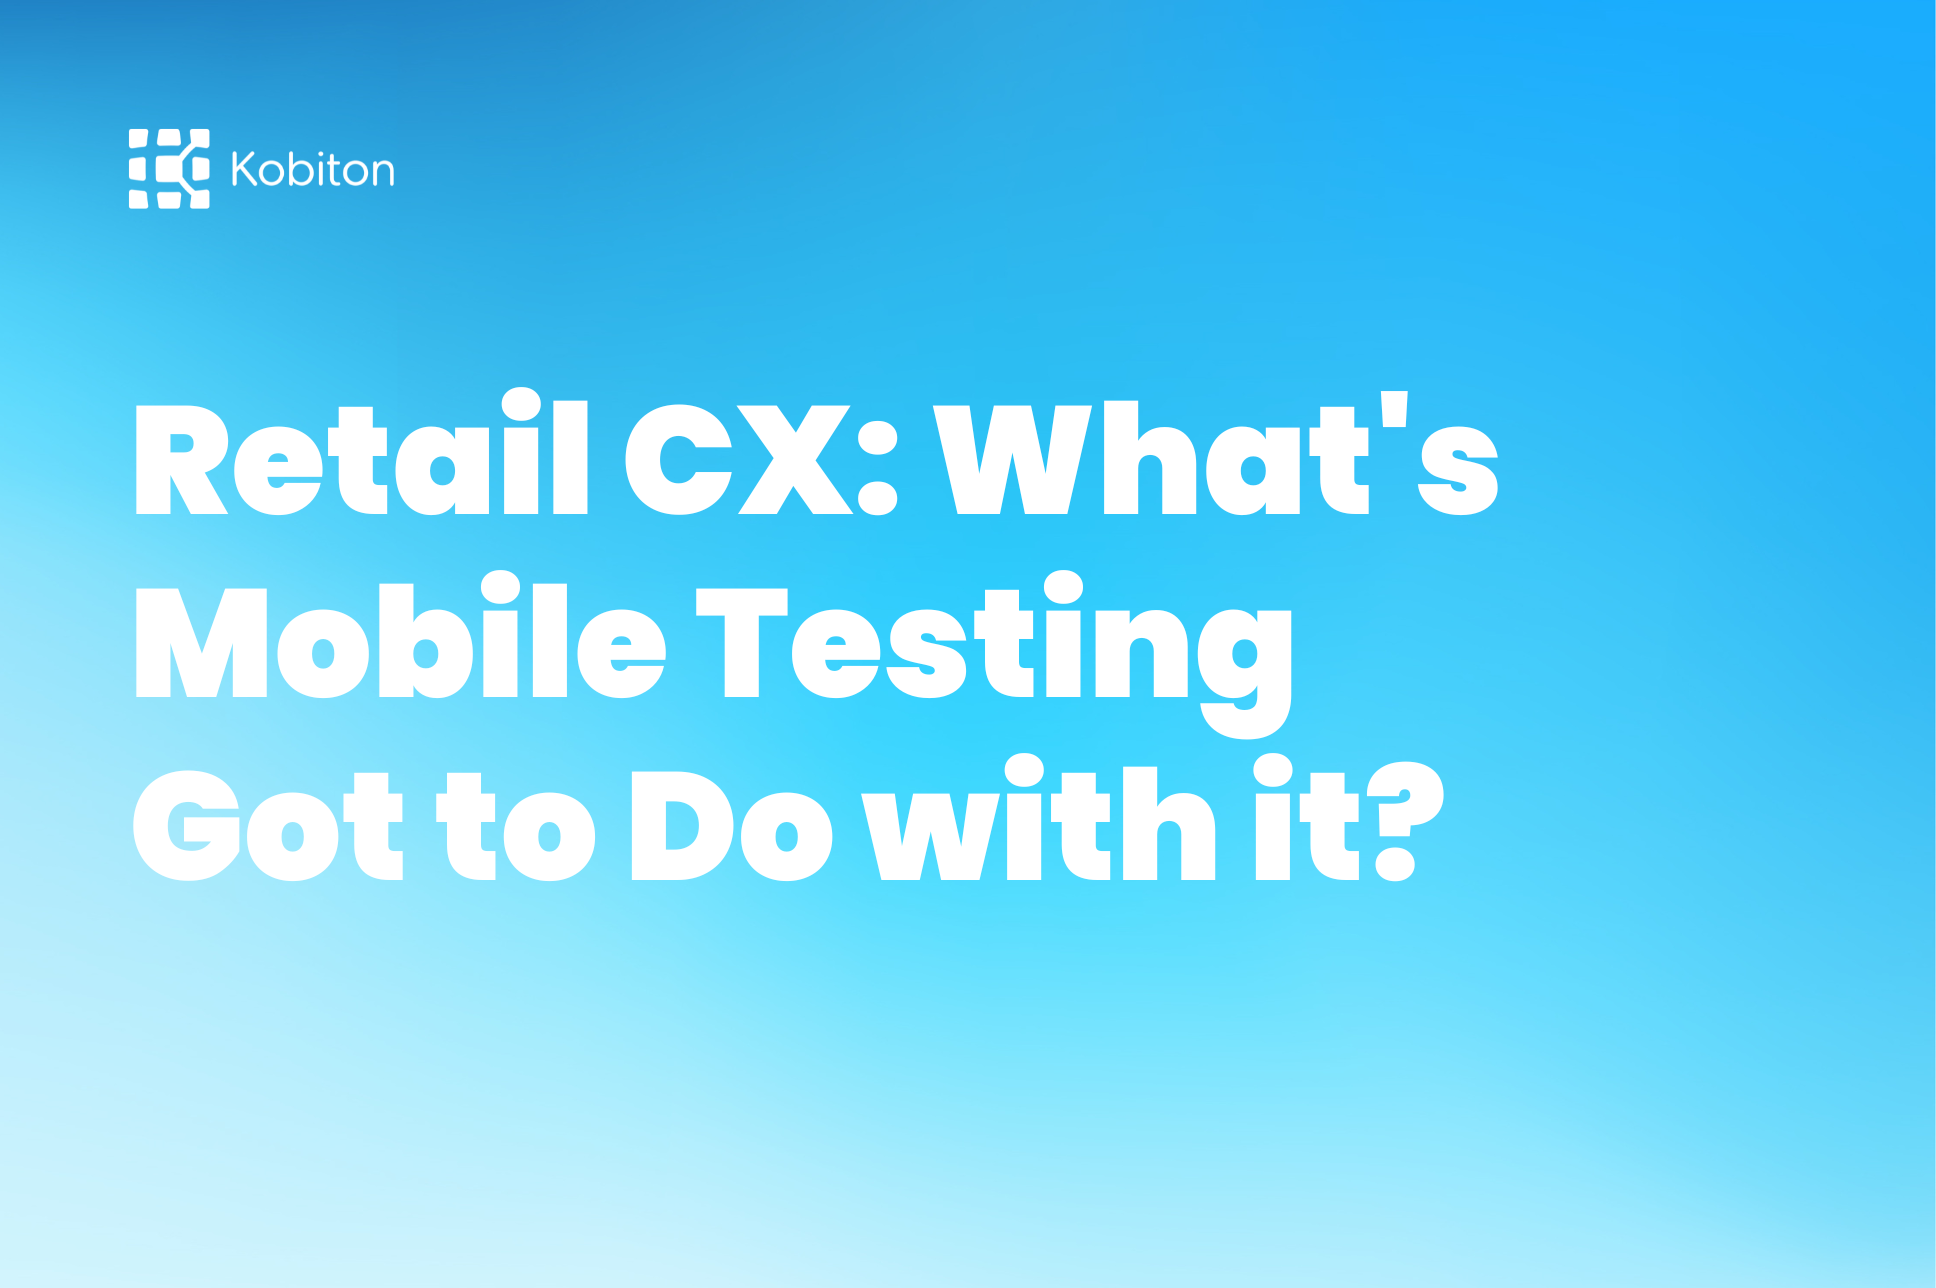 Light blue image with text - Retail cx: what's mobile testing got to do with it?